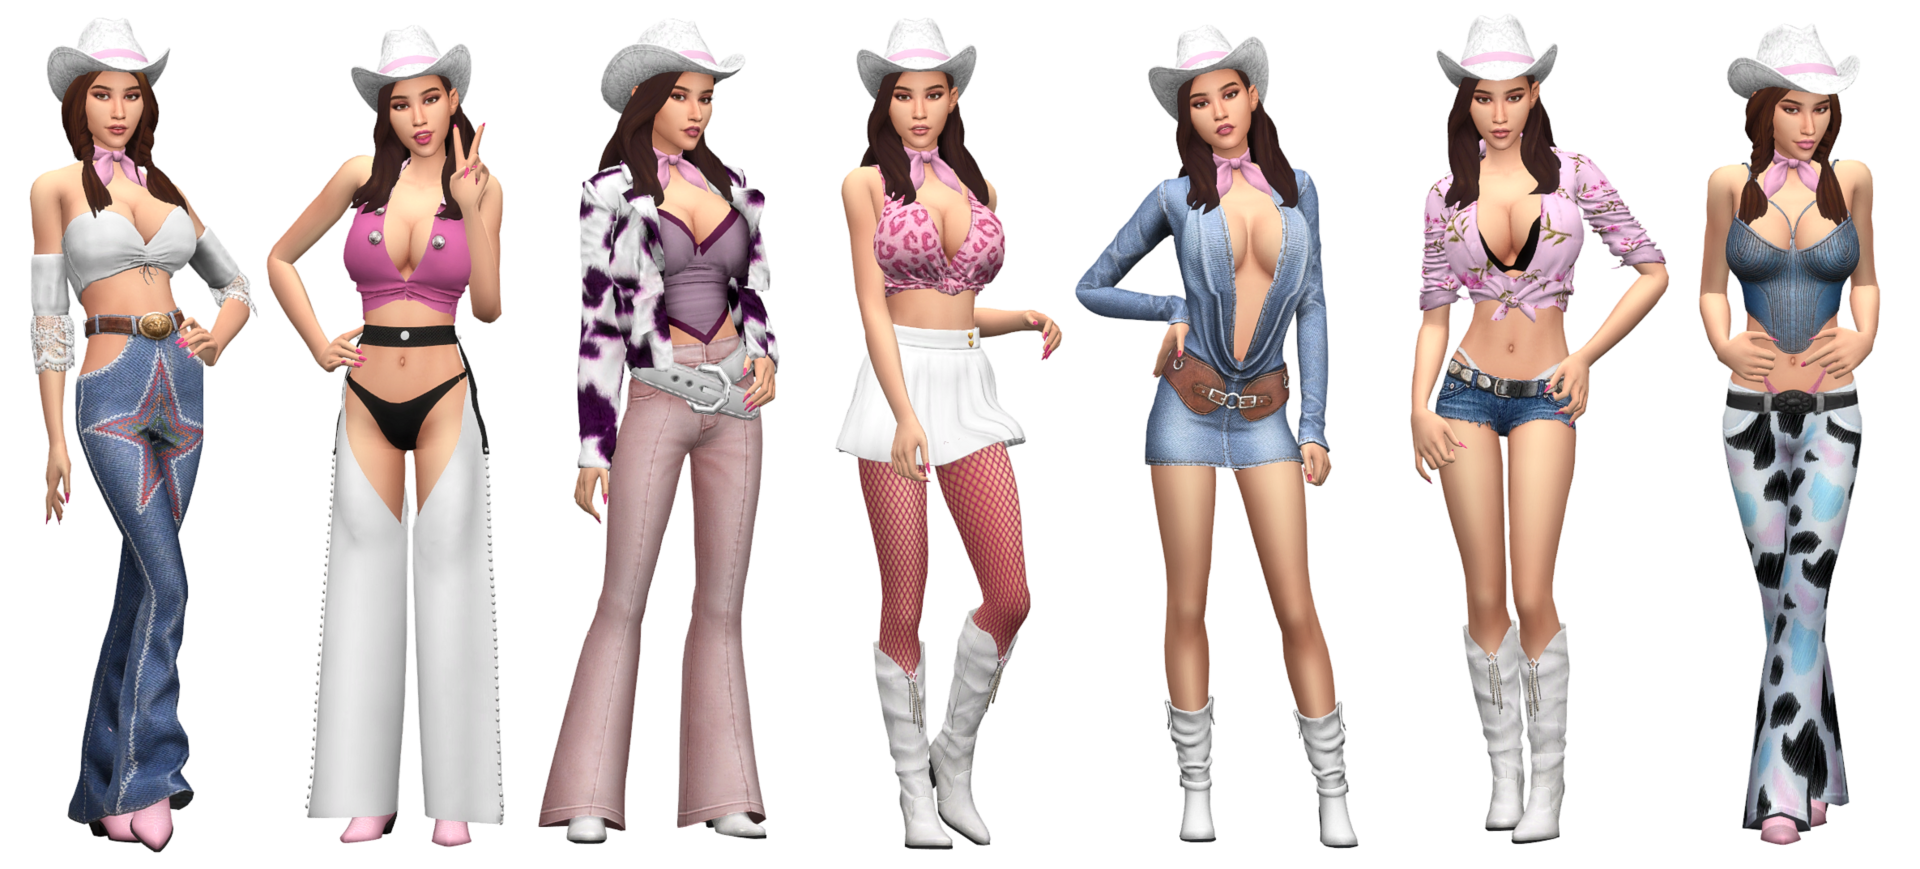 LexieWesternOutfits.thumb.png.8f4130ffc4acc6146dee43a059114c42.png